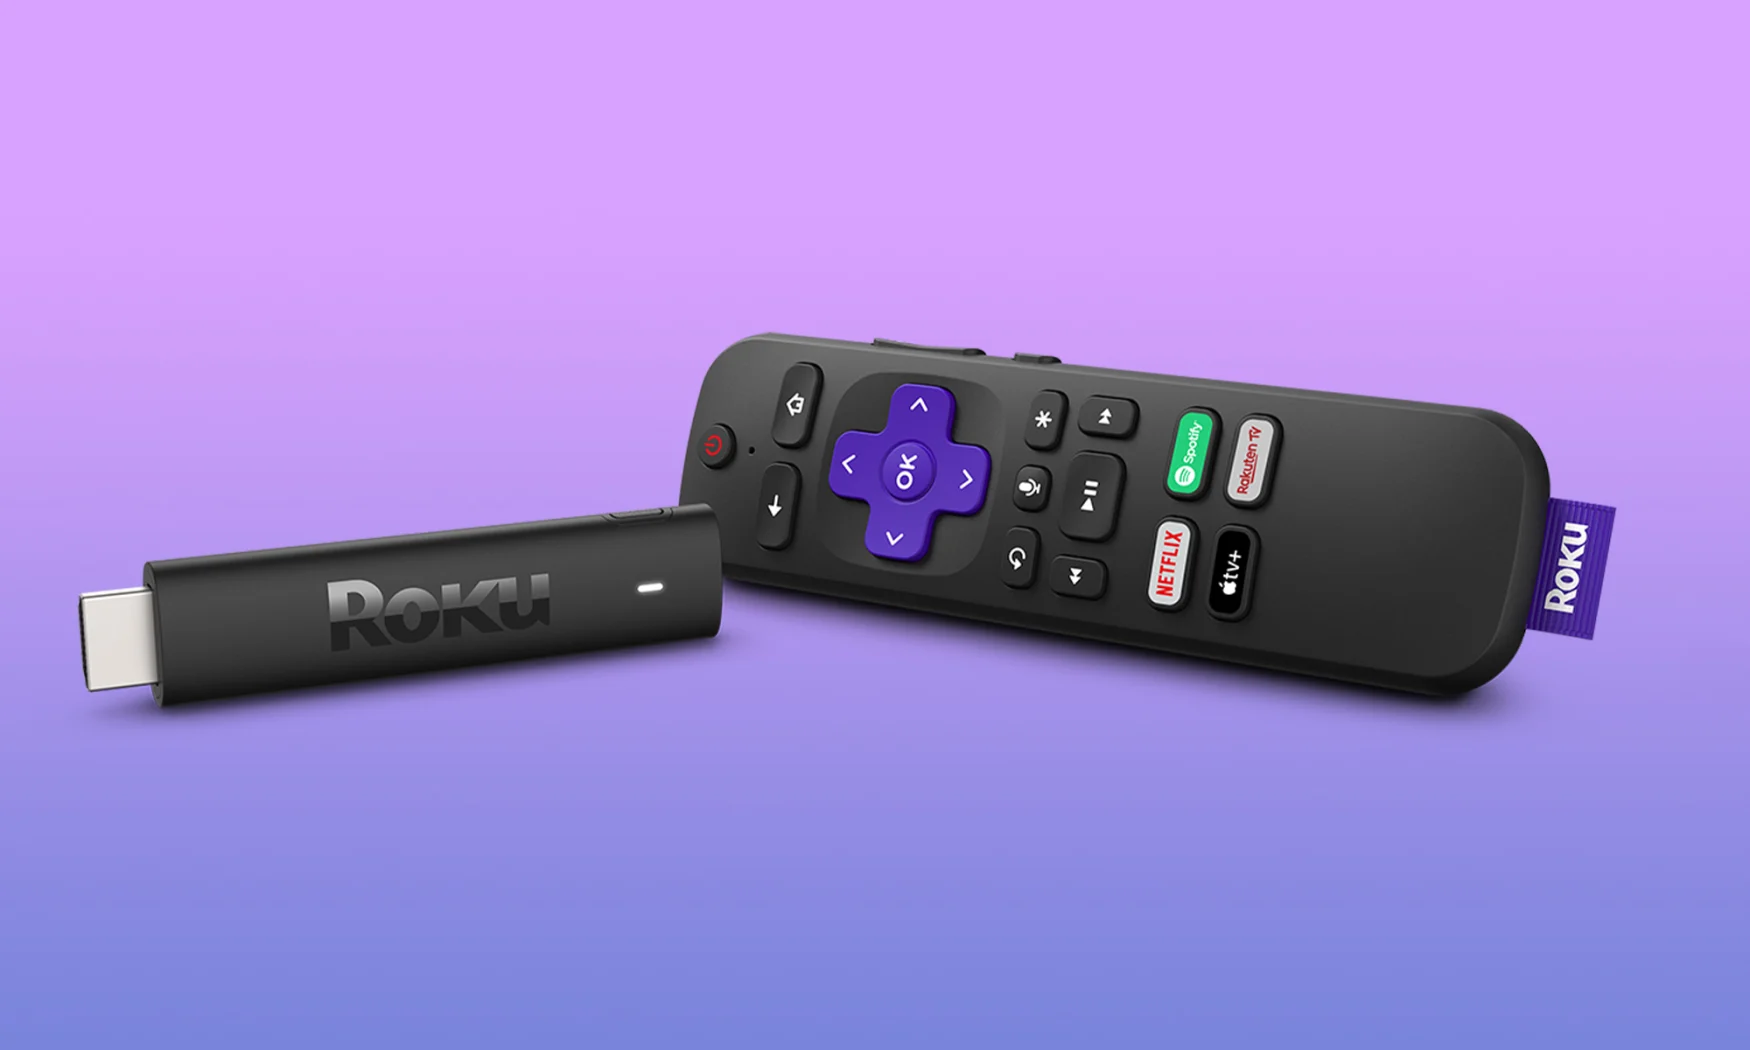 The Roku Streaming Stick 4K seen against a purple gradient background.